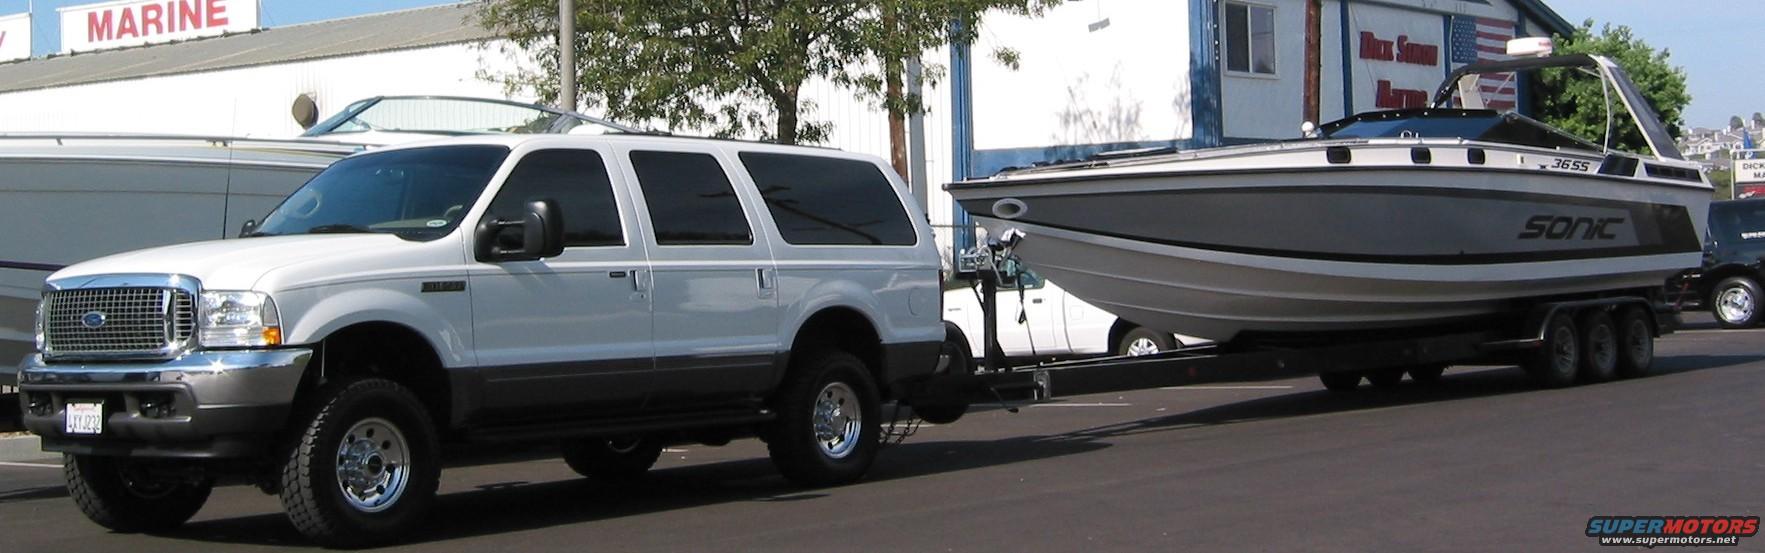 2002 Ford excursion tow capacity #3